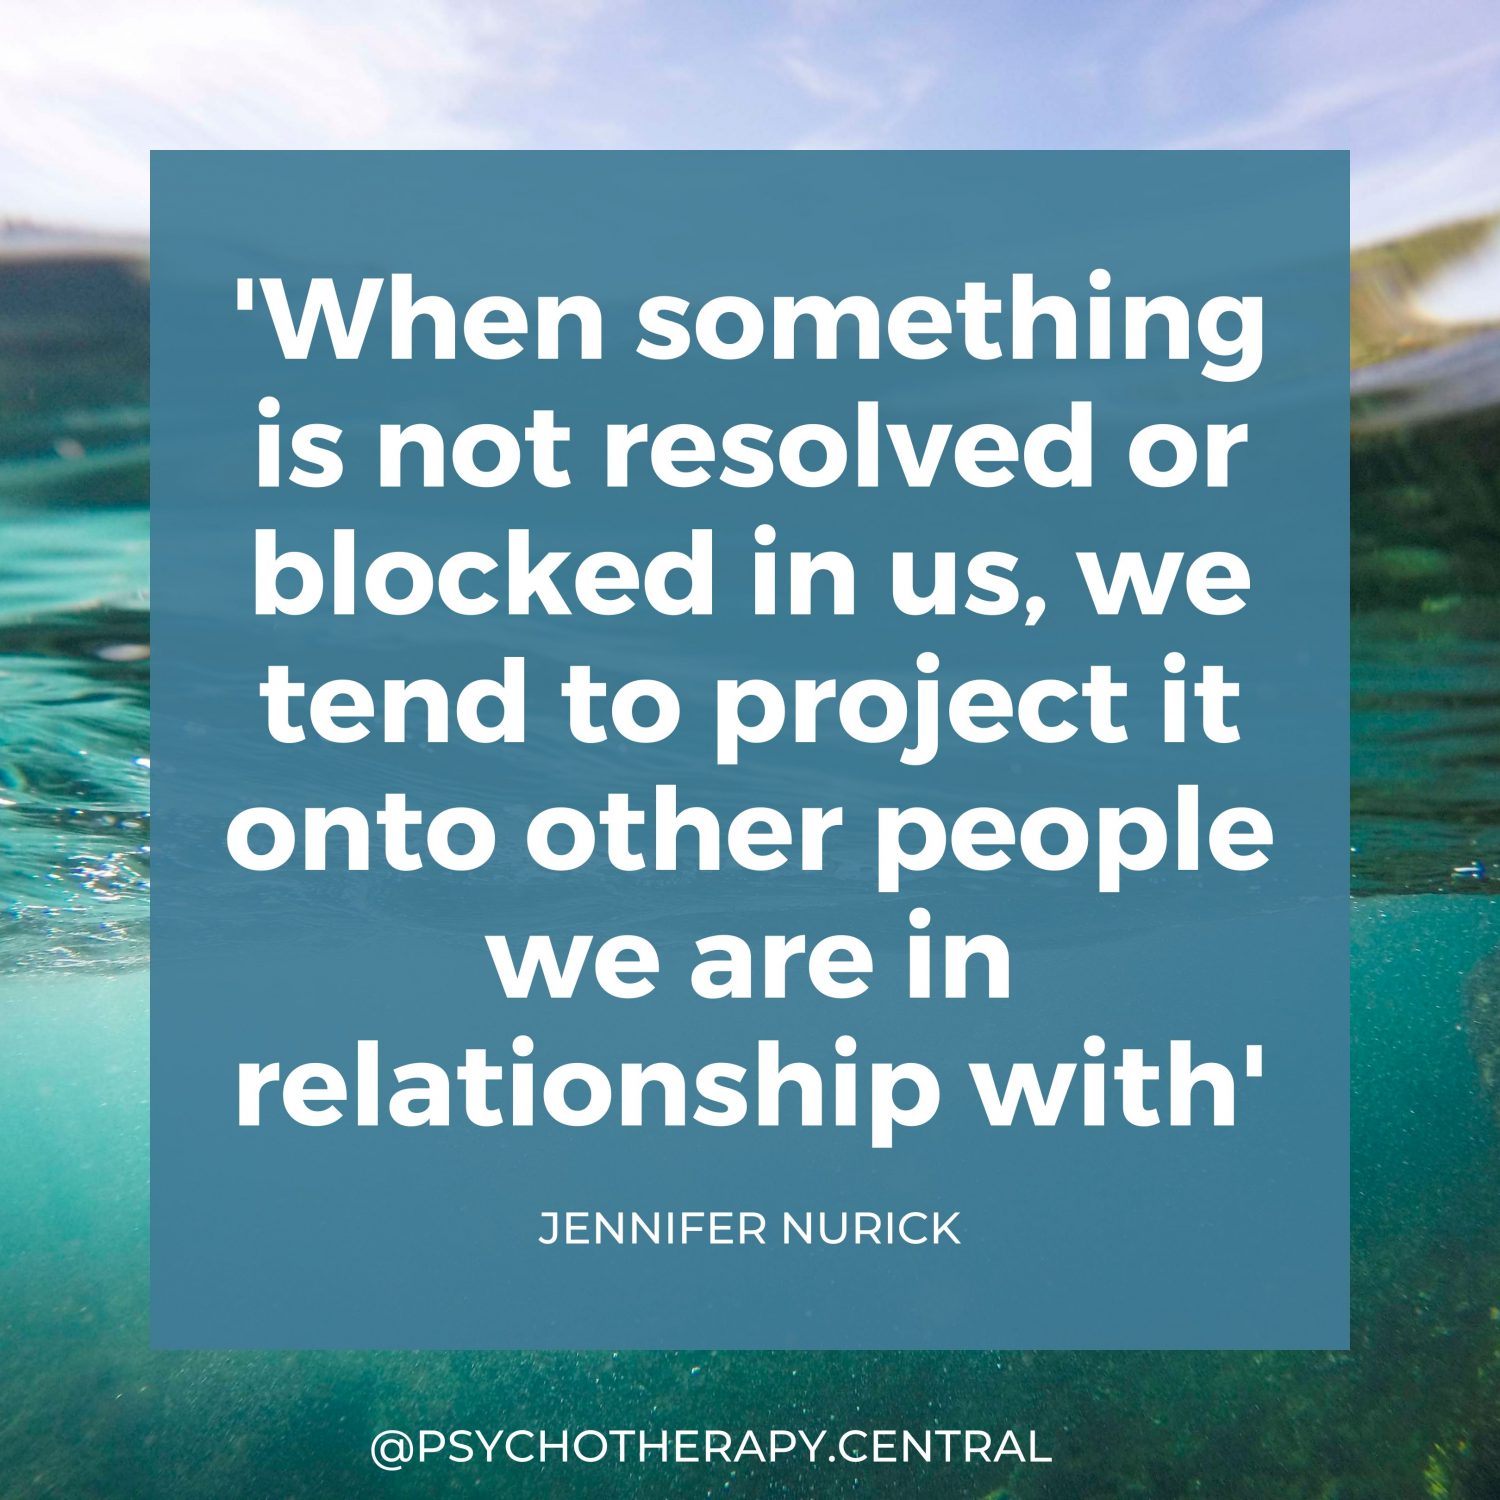 When something is not resolved or blocked in us, we tend to project it onto other people we are in relationship with.